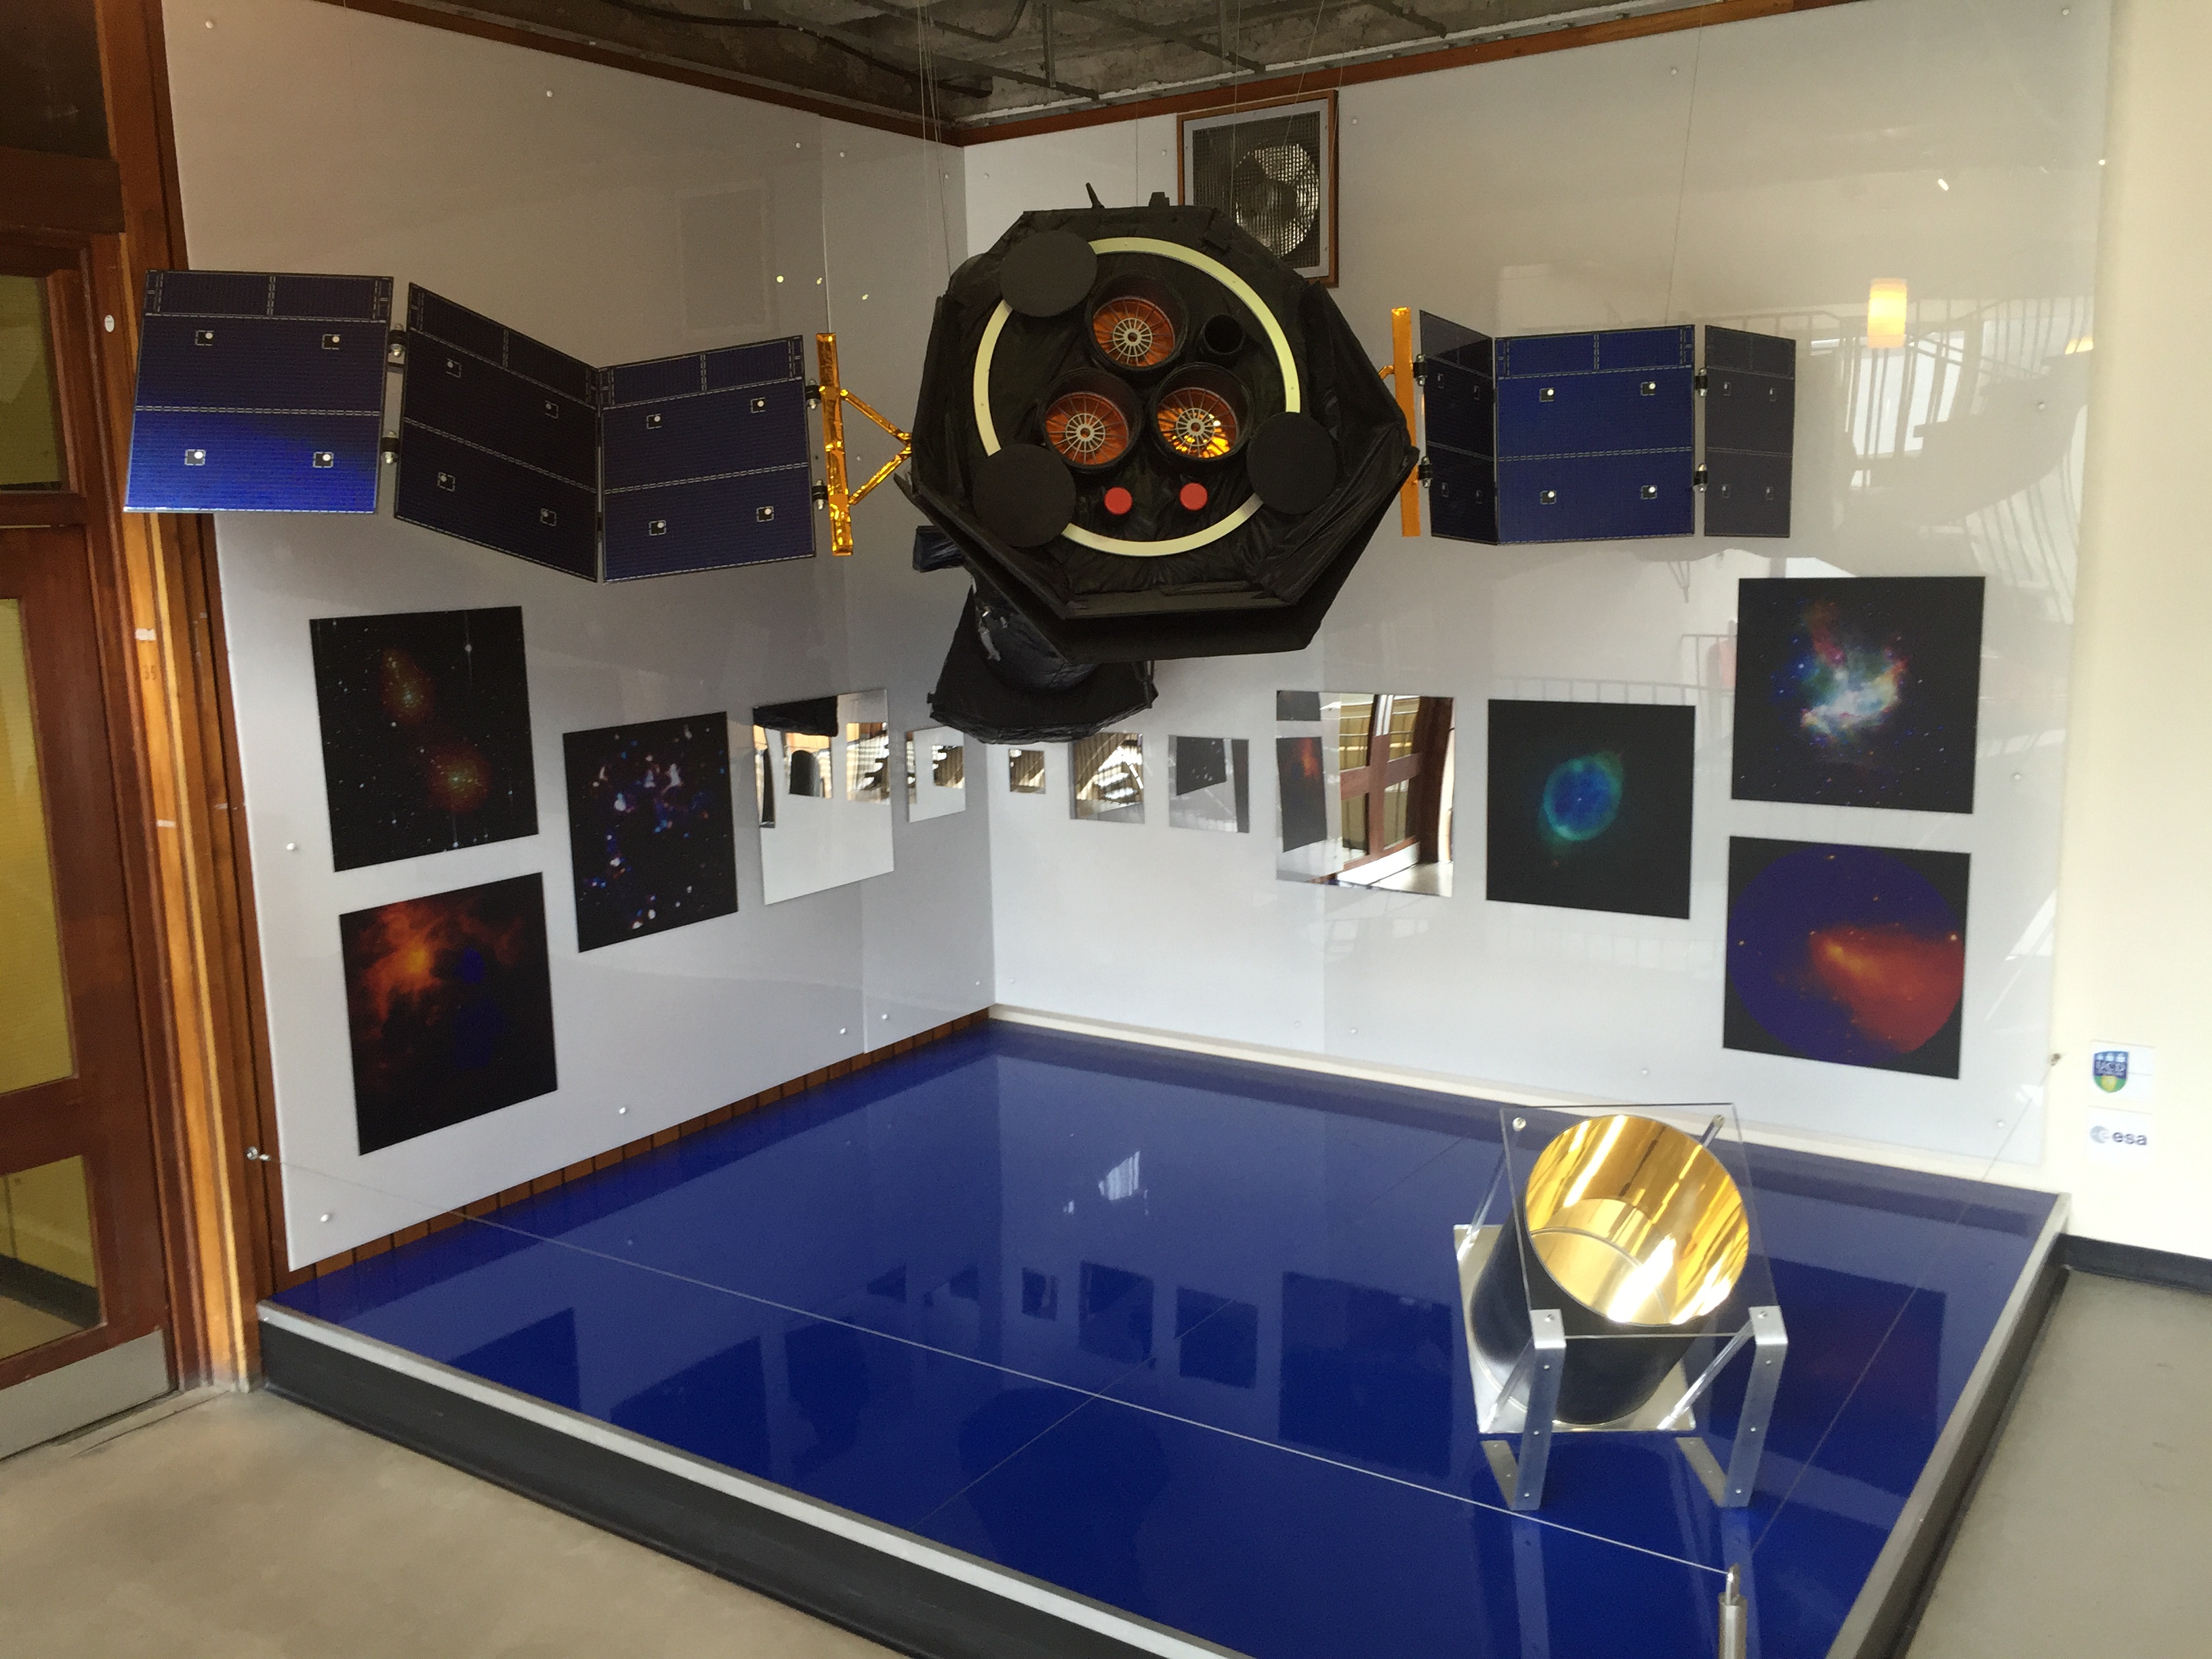 Physics internship - The second floor of the UCD Physics Building has a scale model of XMM Newton, a European Space Agency satellite. I pass by this on my way to class each morning!